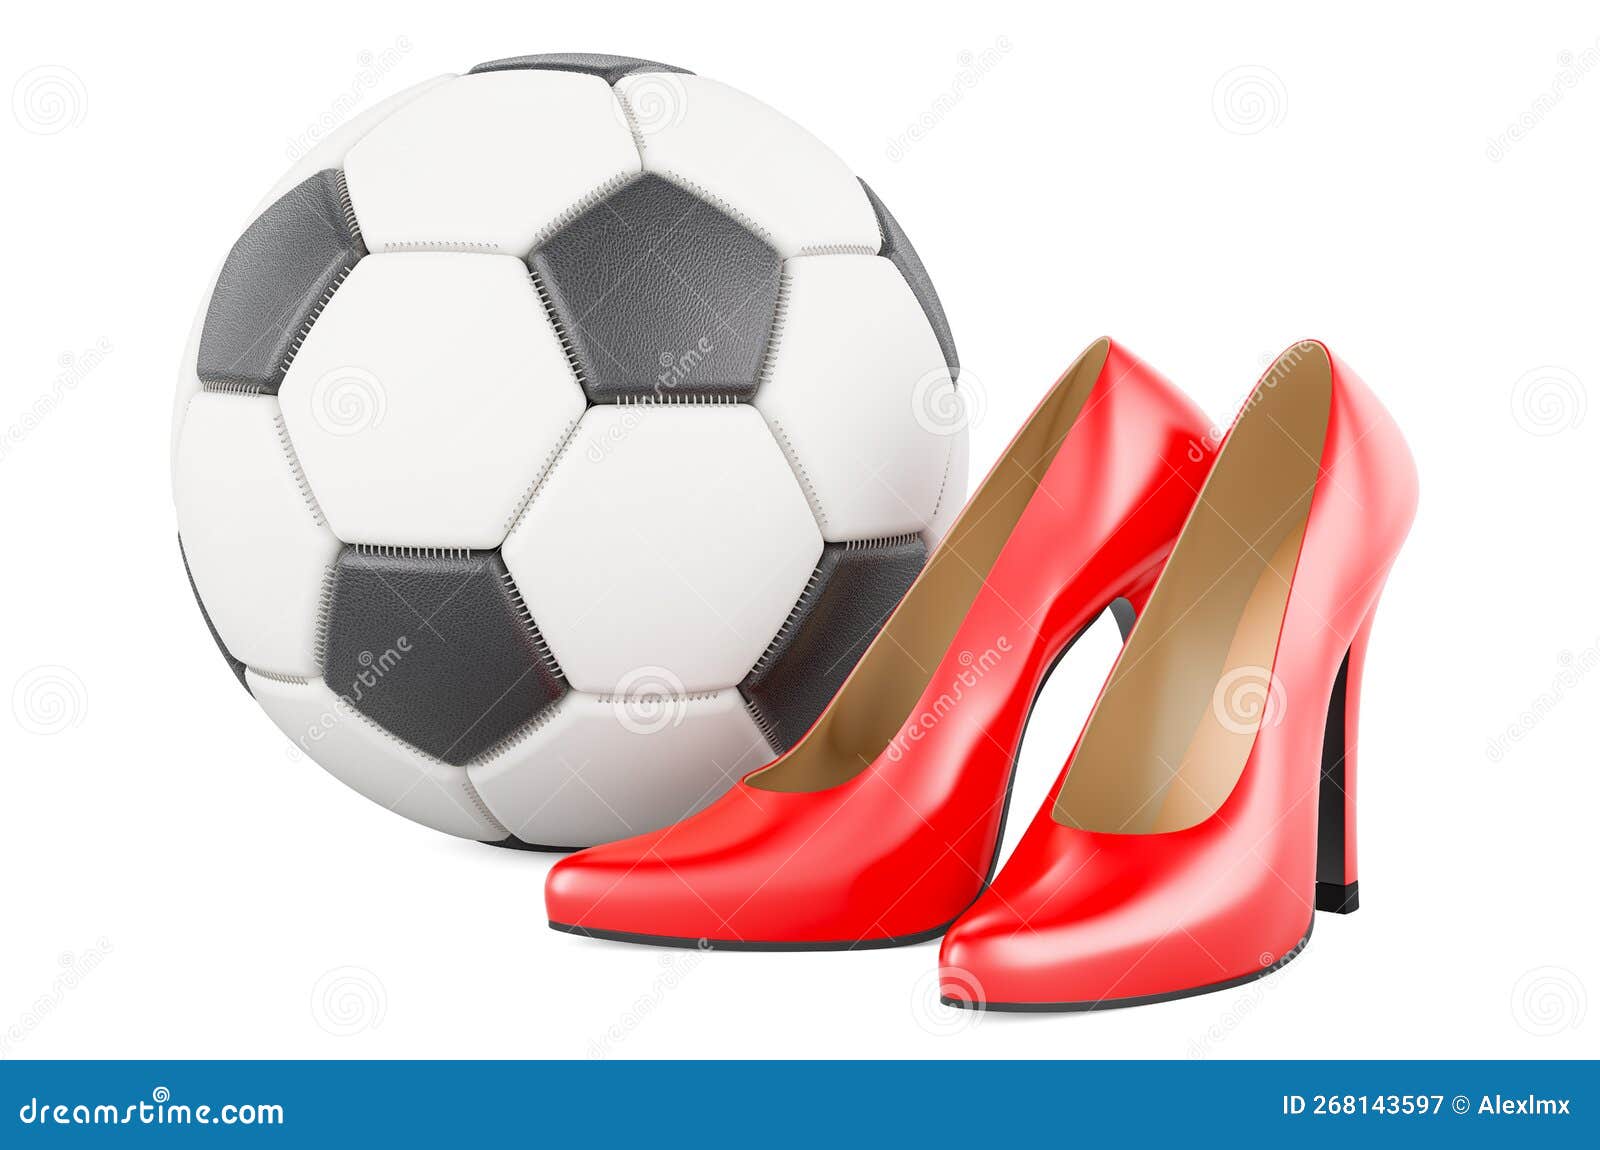 Young Woman In Short Skirt And High Heels Kicking Football Indoors High-Res  Stock Photo - Getty Images